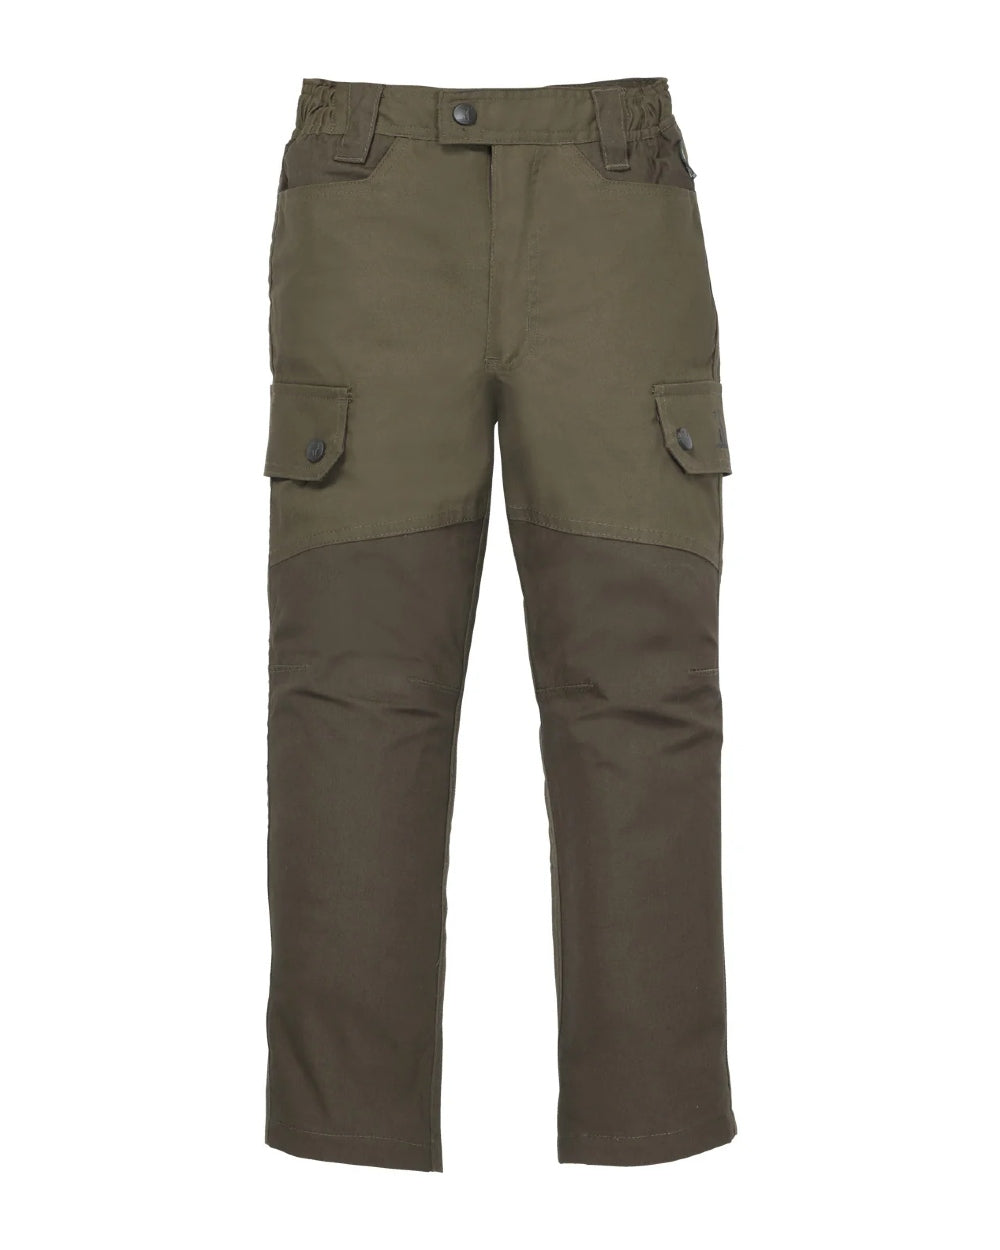 Percussion Childrens Imperlight Trousers in Khaki